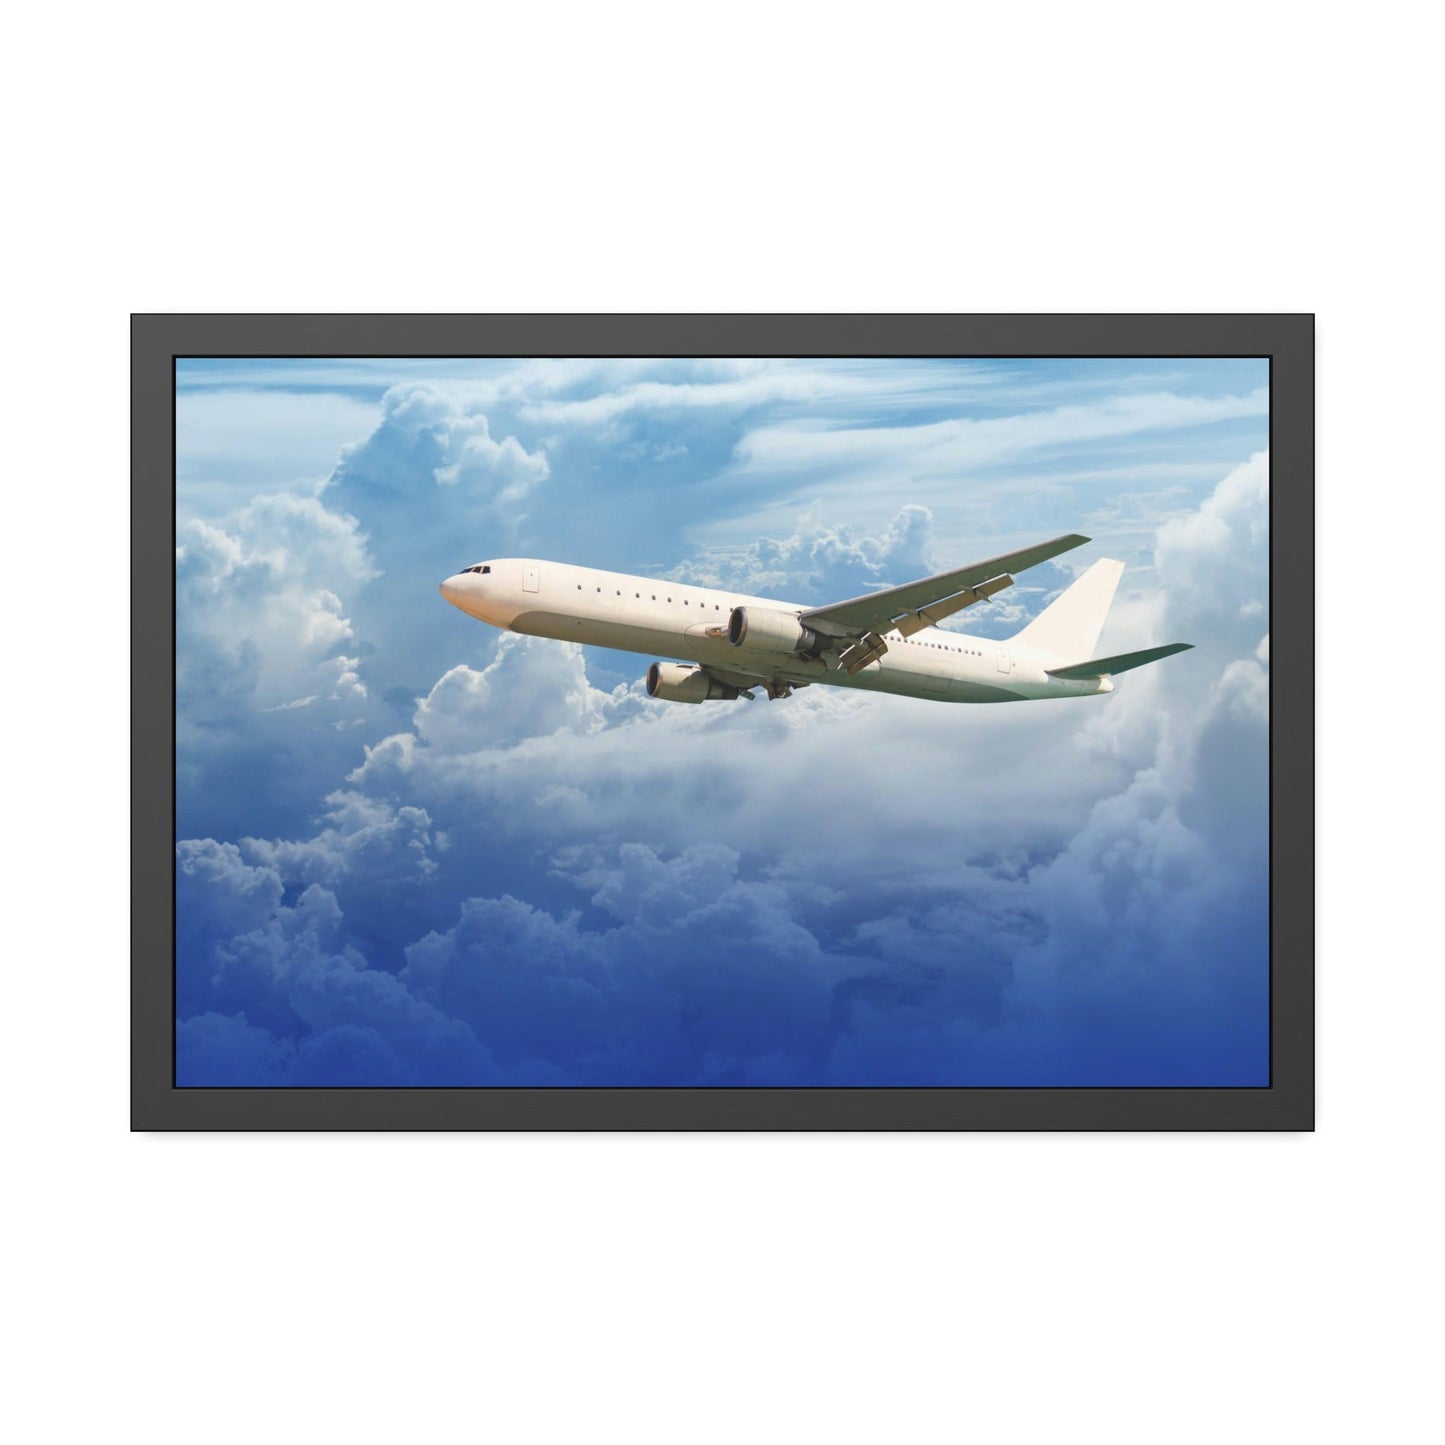 The Art of Flight: Printed Canvas & Poster of Classic and Modern Airplane